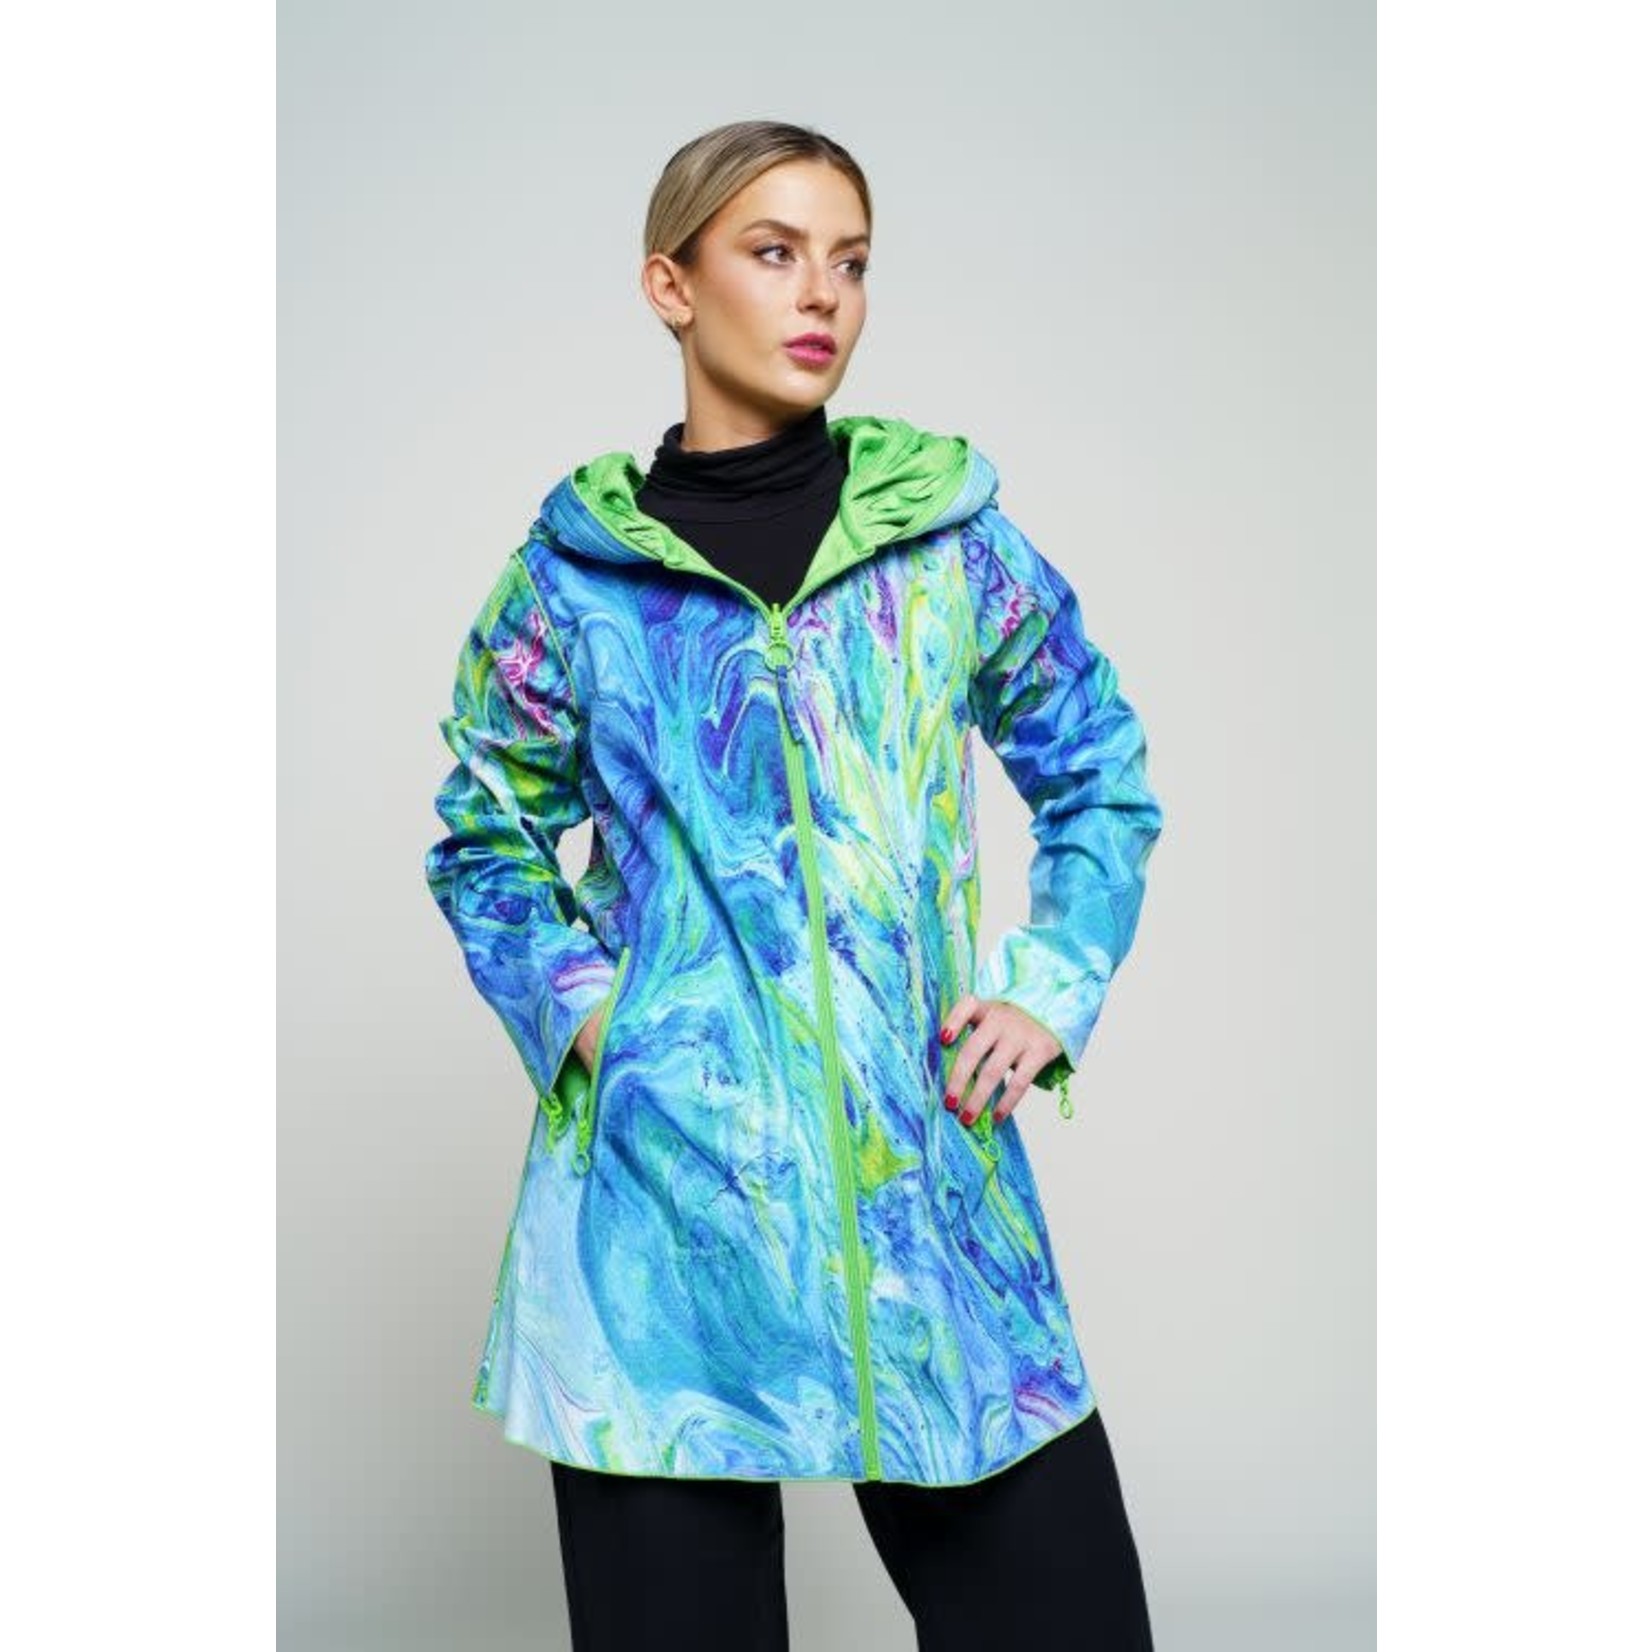 Ubu Reversable Jacket with Crinkle Hood in Going Places and Lime